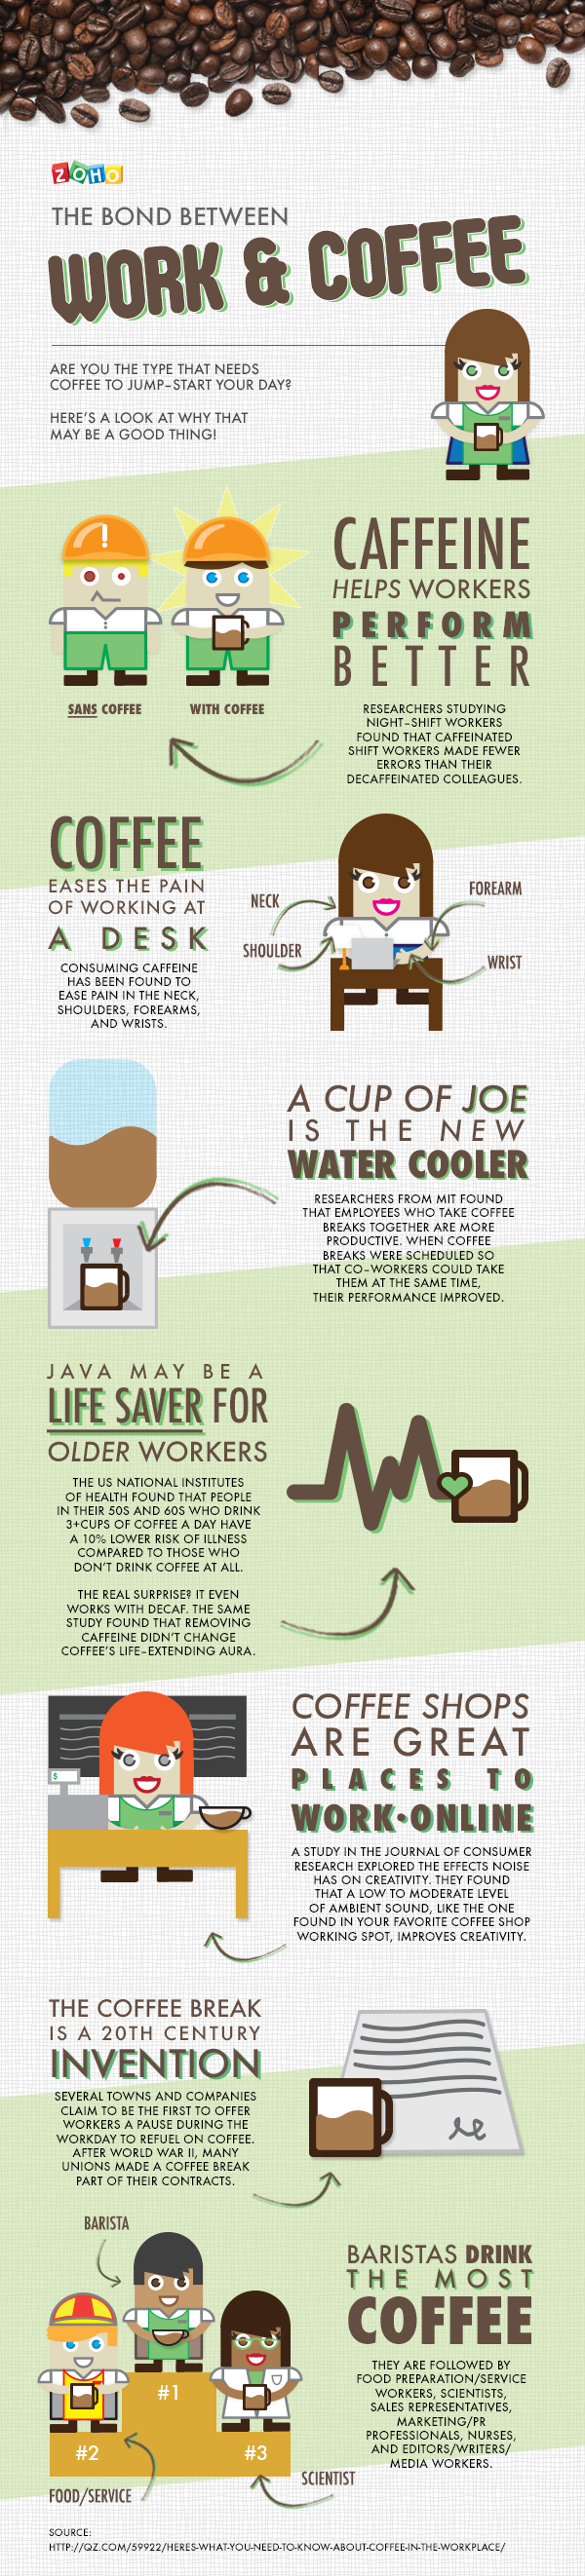 The Bond Between Work and Coffee [Infographic]